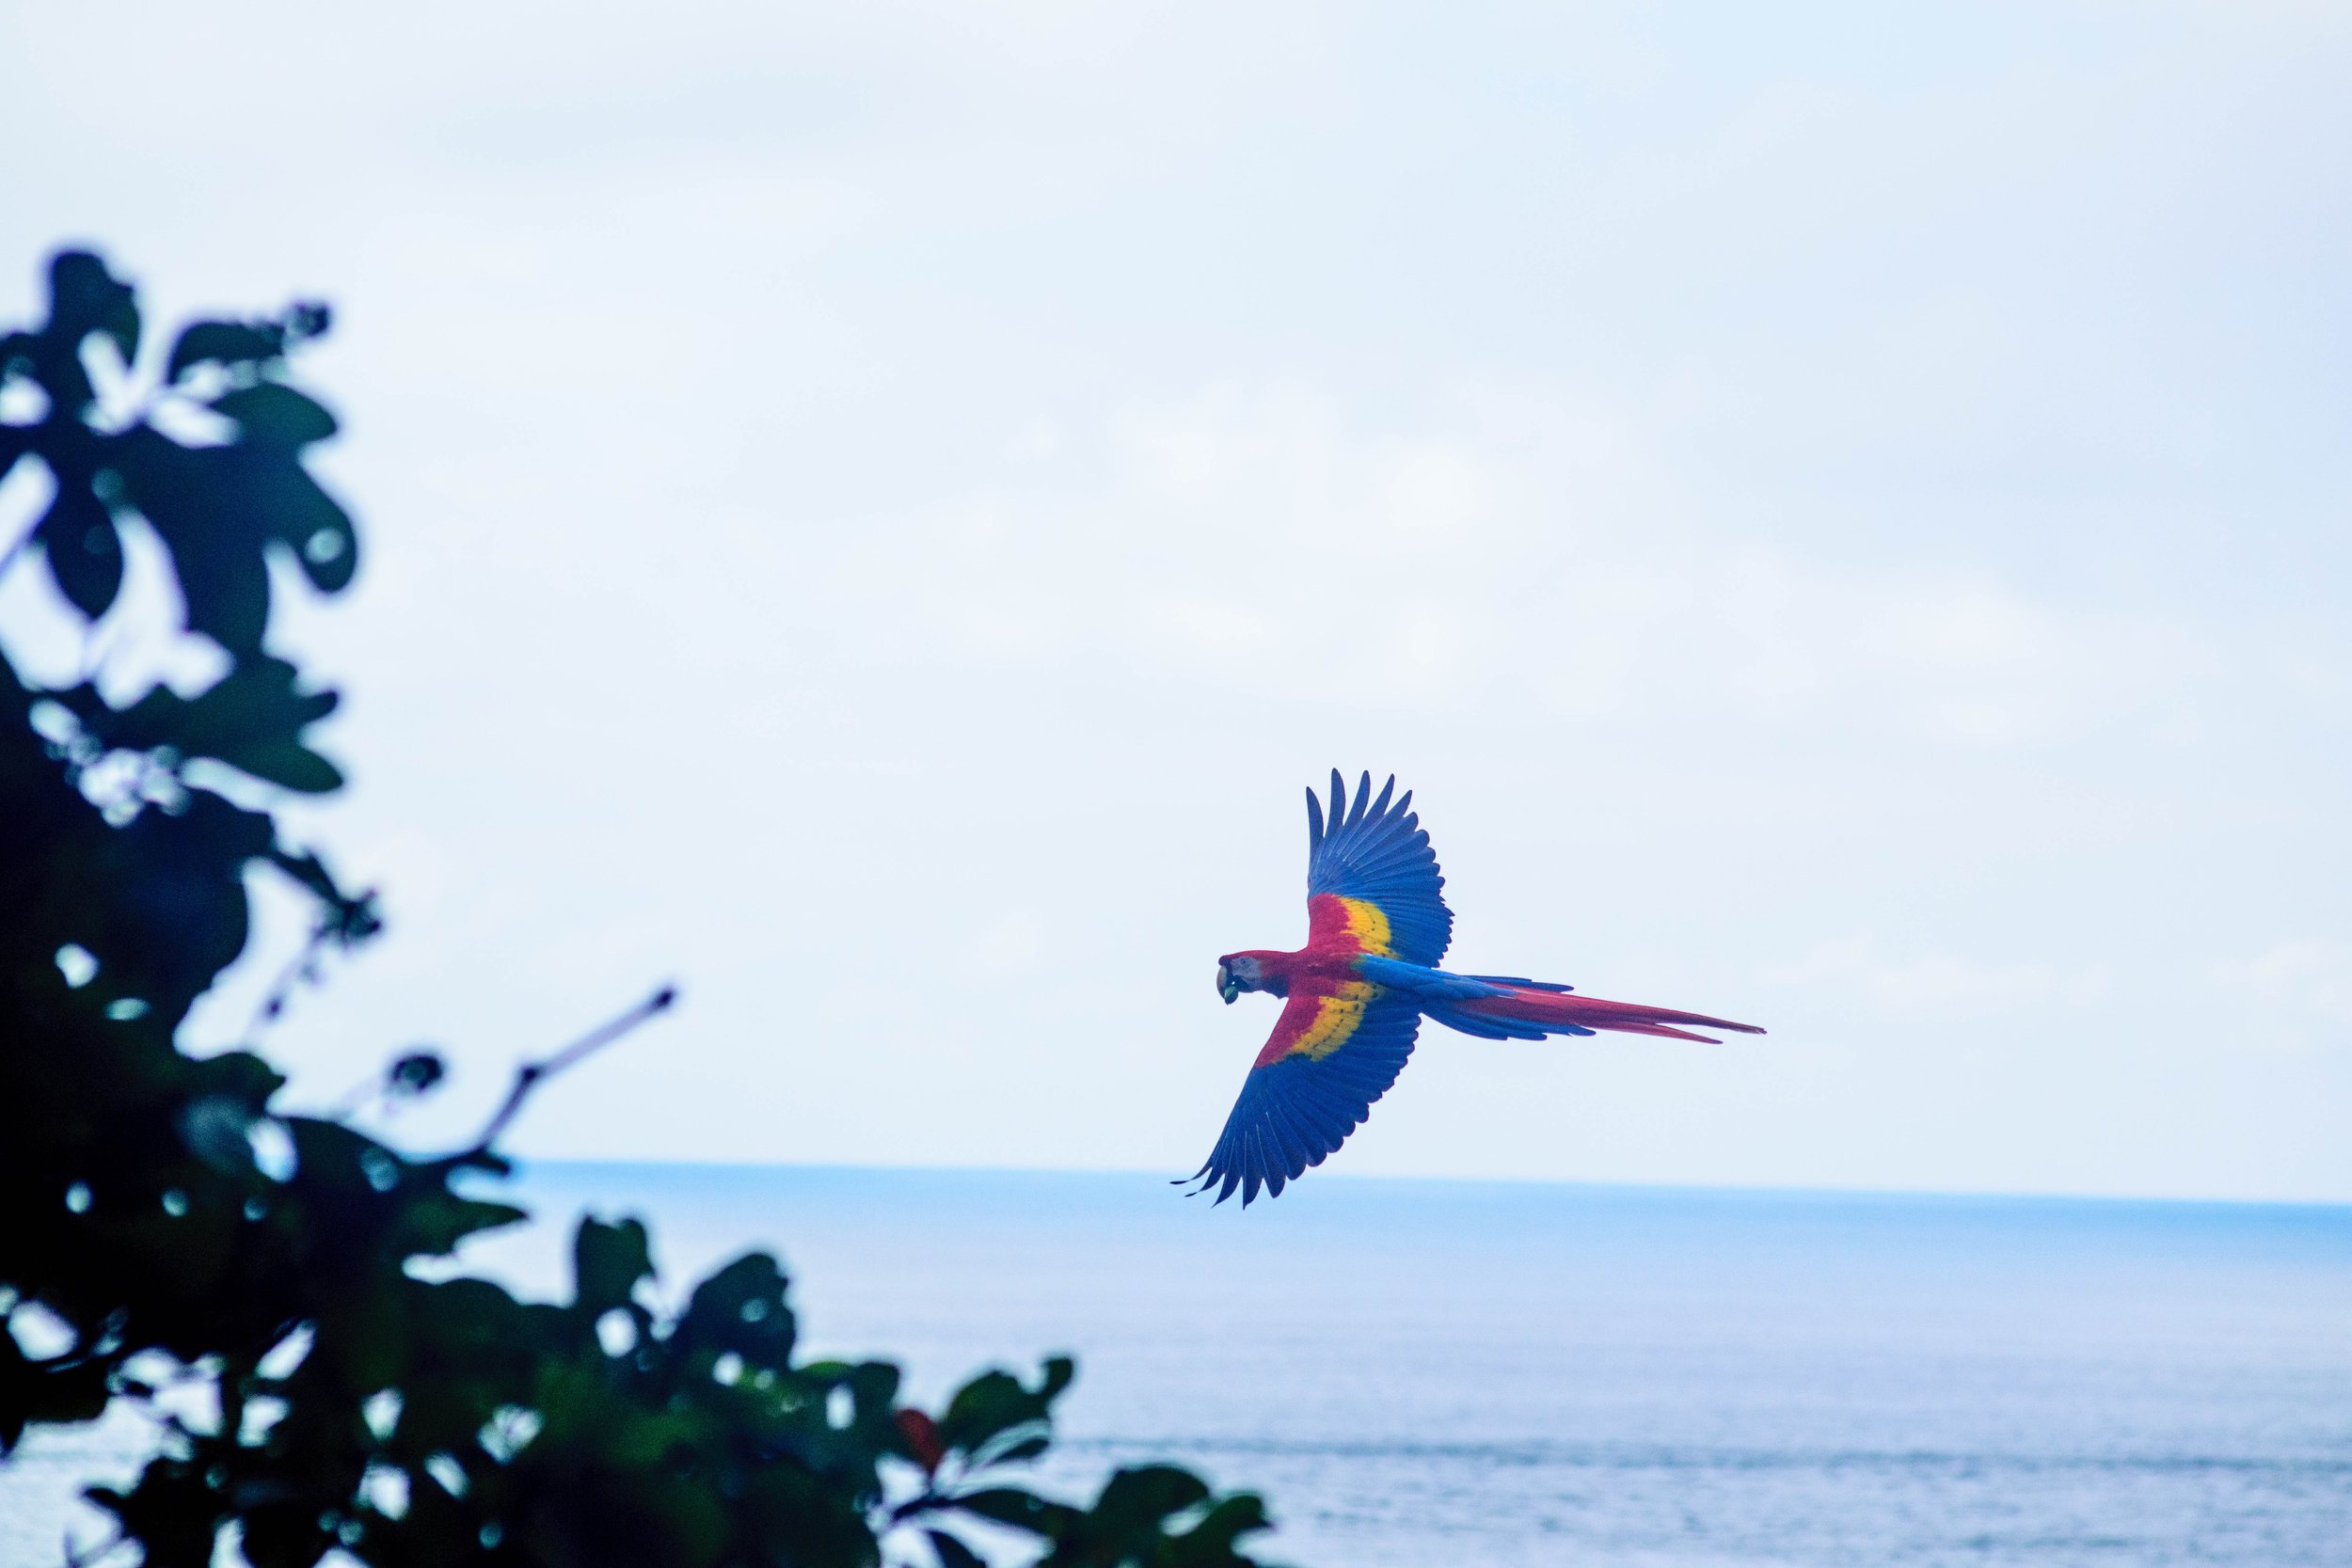 ocean view and bird at a eco resort costa rica.jpg